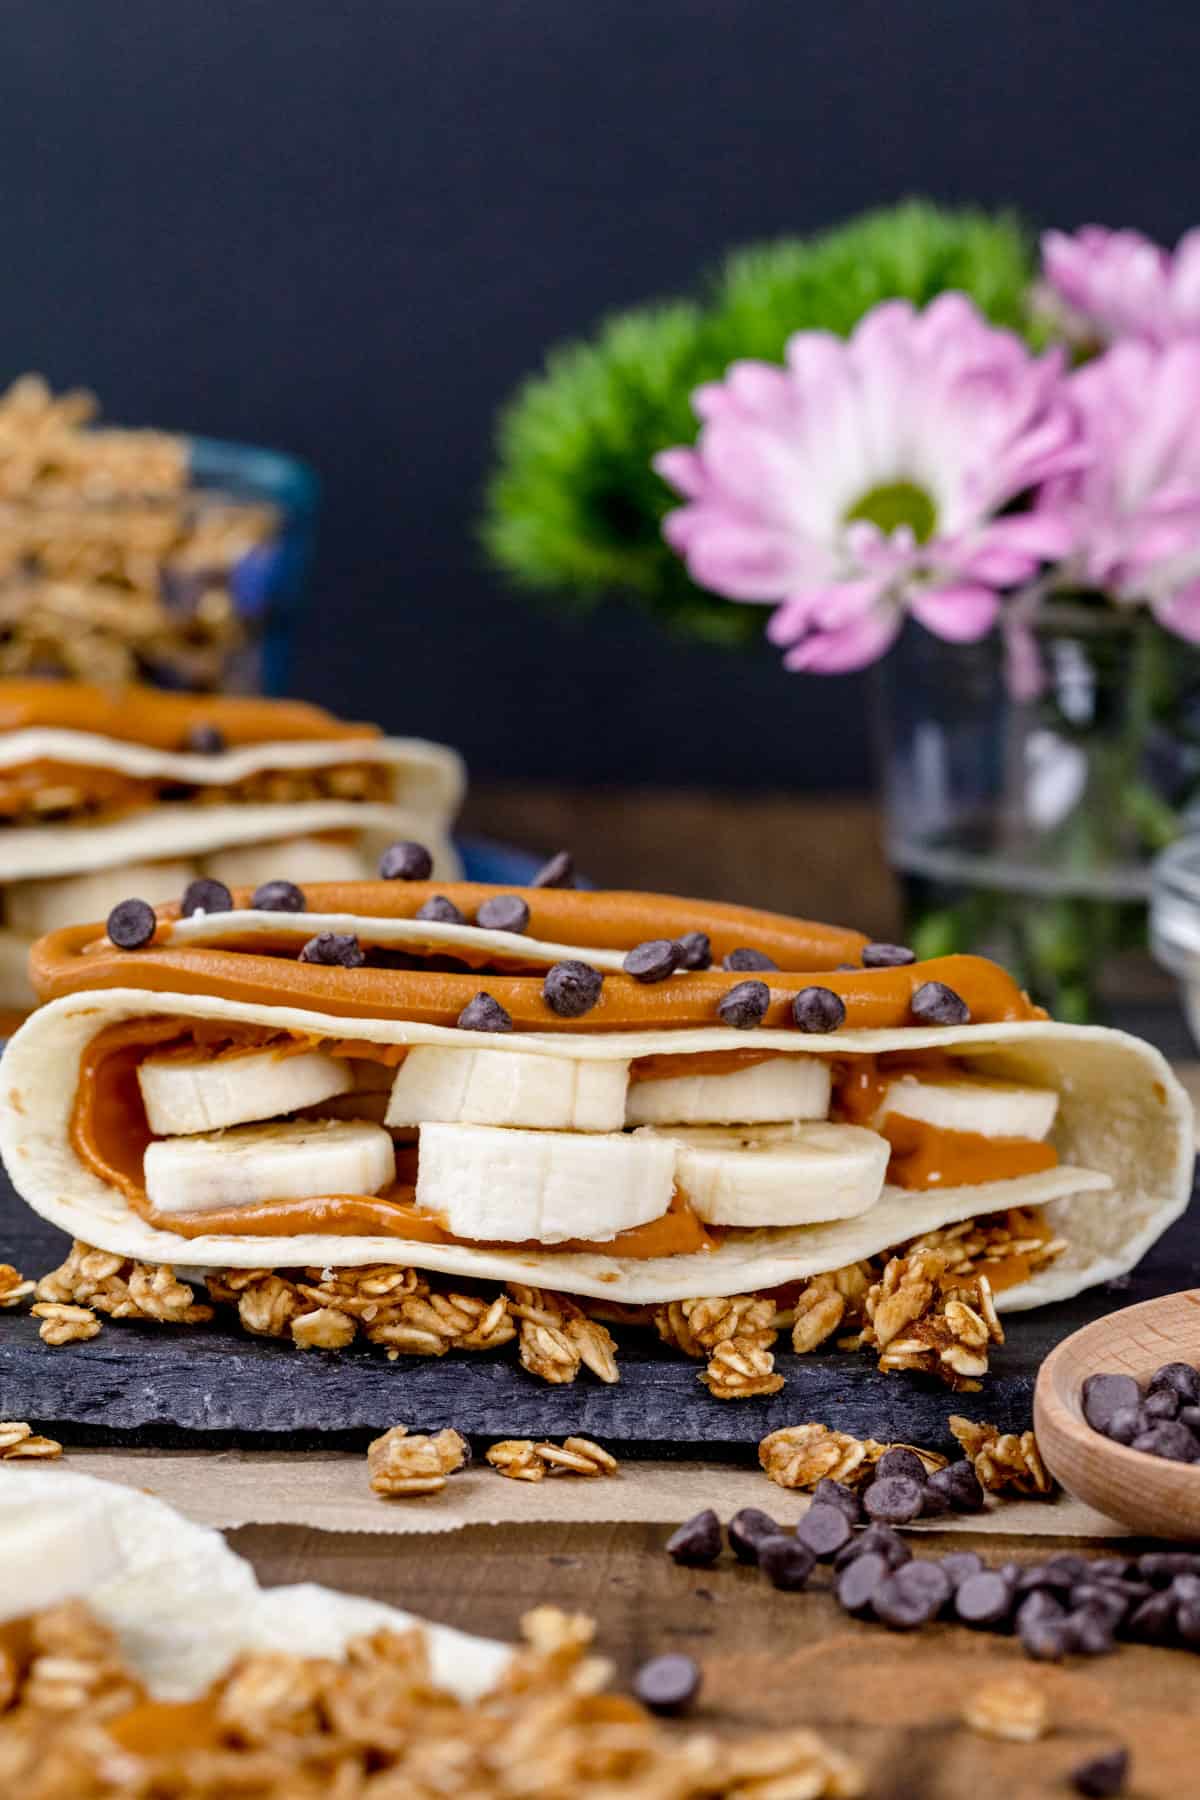 A finished sunbutter and banana wrap on a kitchen table filled with ingredients like banana slices, mini chocolate chips, and granola. Fresh flowers and more wraps are blurred in the background.